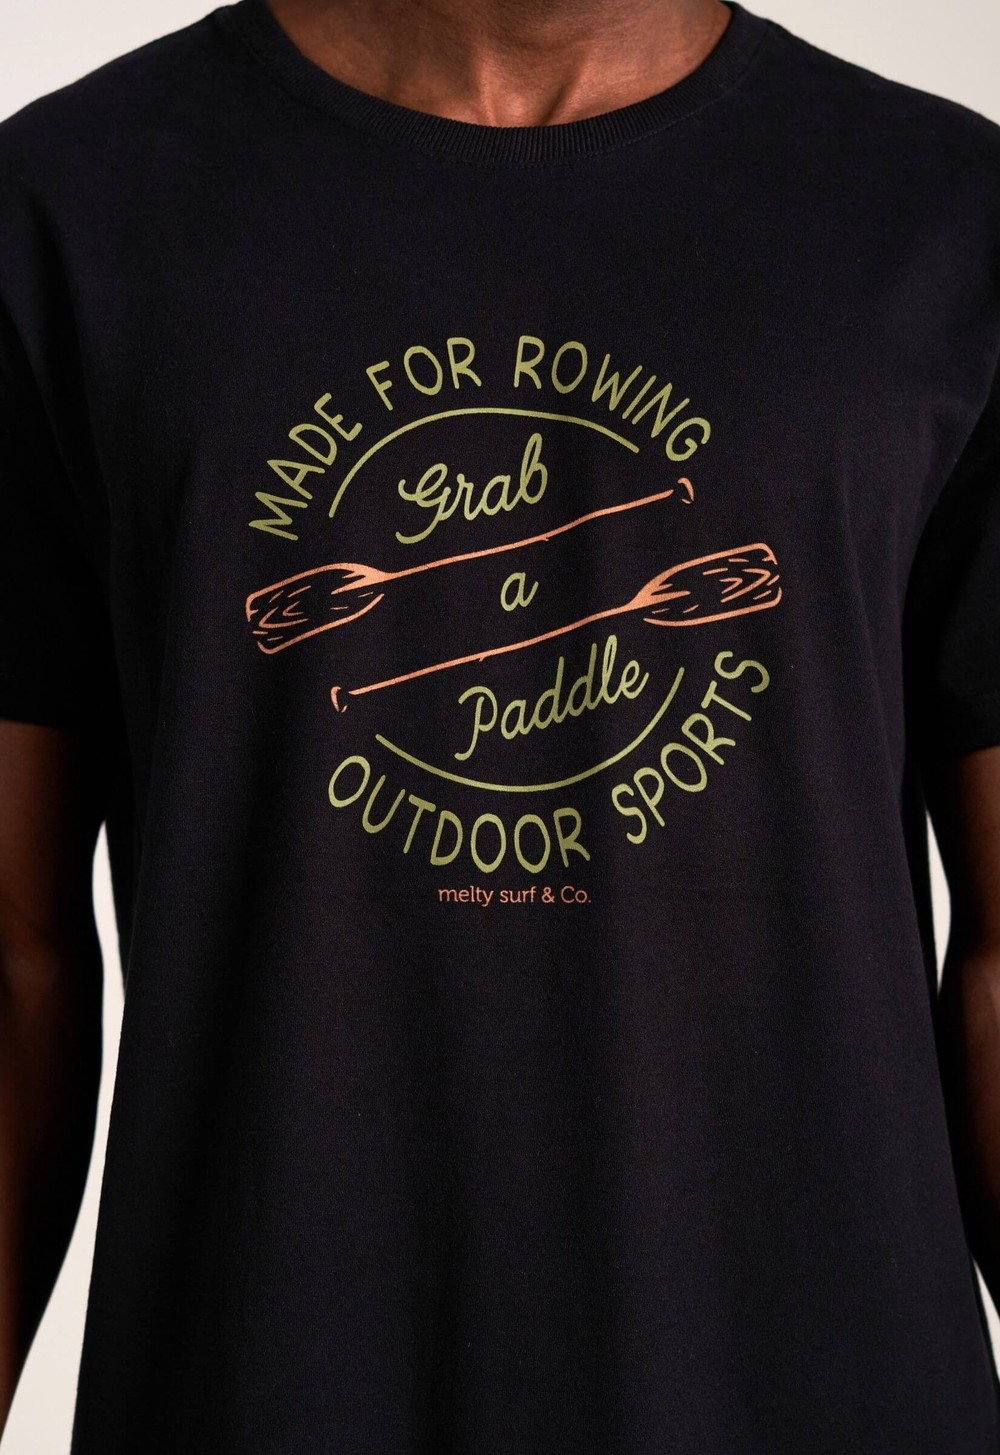 T-shirt Made For Rowing